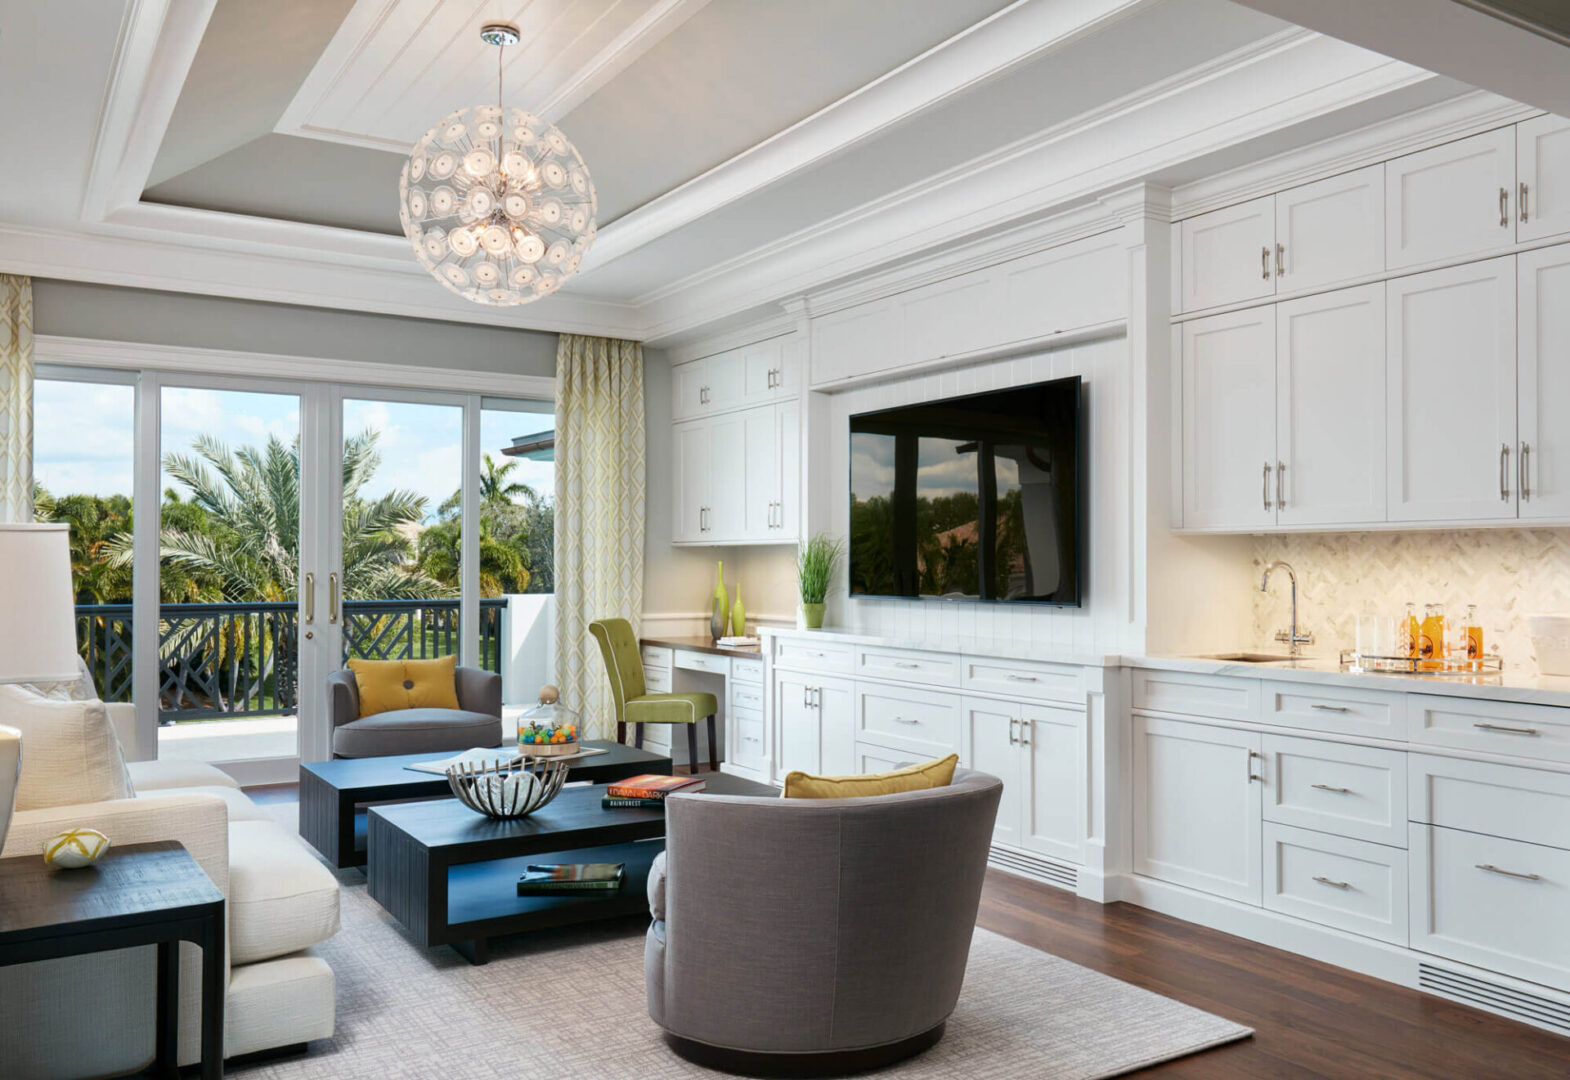 A living room with white furniture and a large flat screen tv.